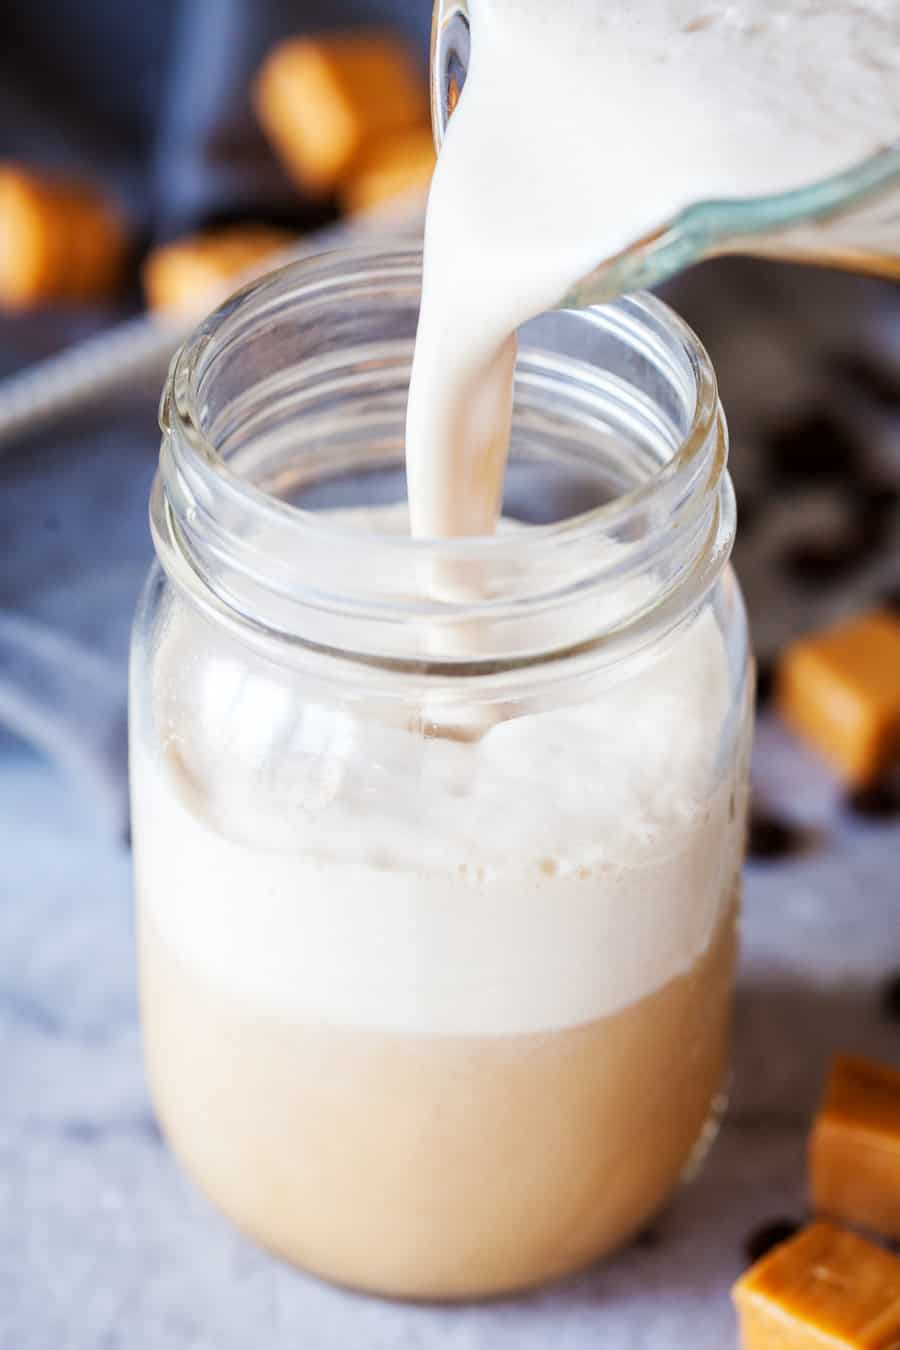 Nothing is more refreshing during summer than a chilled beverage - like this delicious vanilla caramel iced coffee recipe. So easy to make!